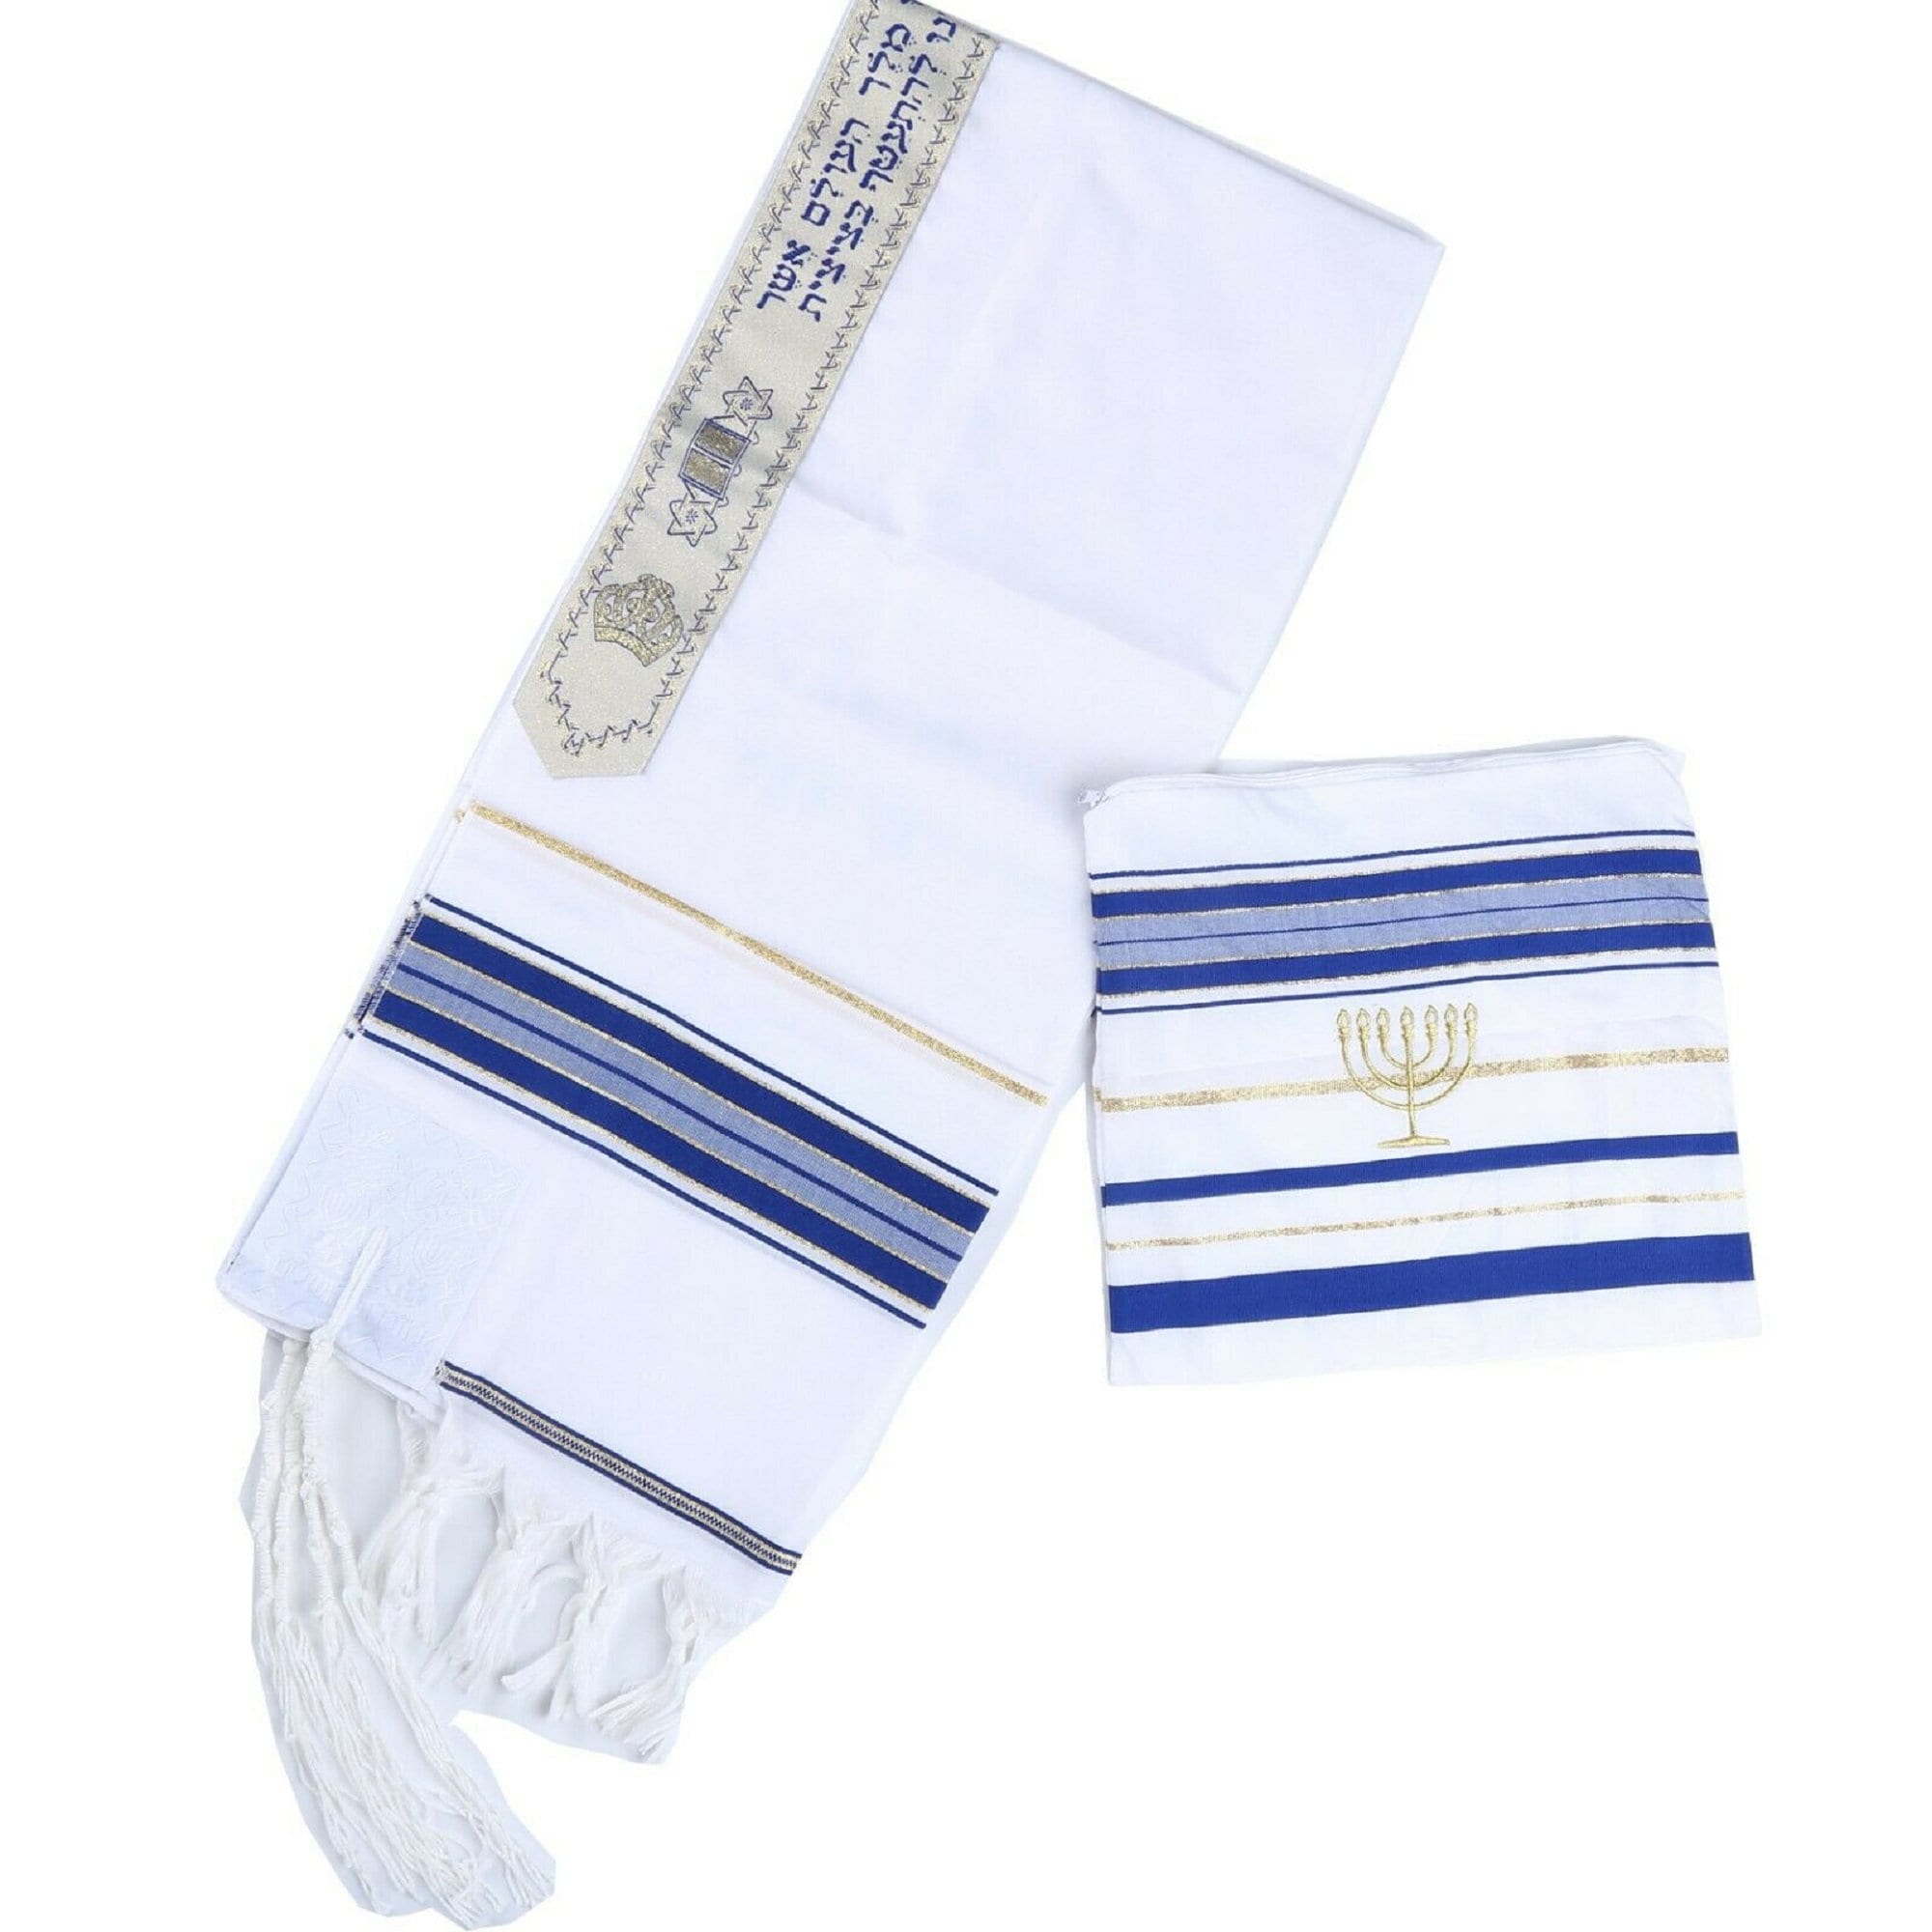 Beautiful Tallit Holders, Prayer Shawl Clips, Tallit Clips, Jewish Gift,  Sterling Silver Gift, Comfortable Clips, Handmade in Israel M026 